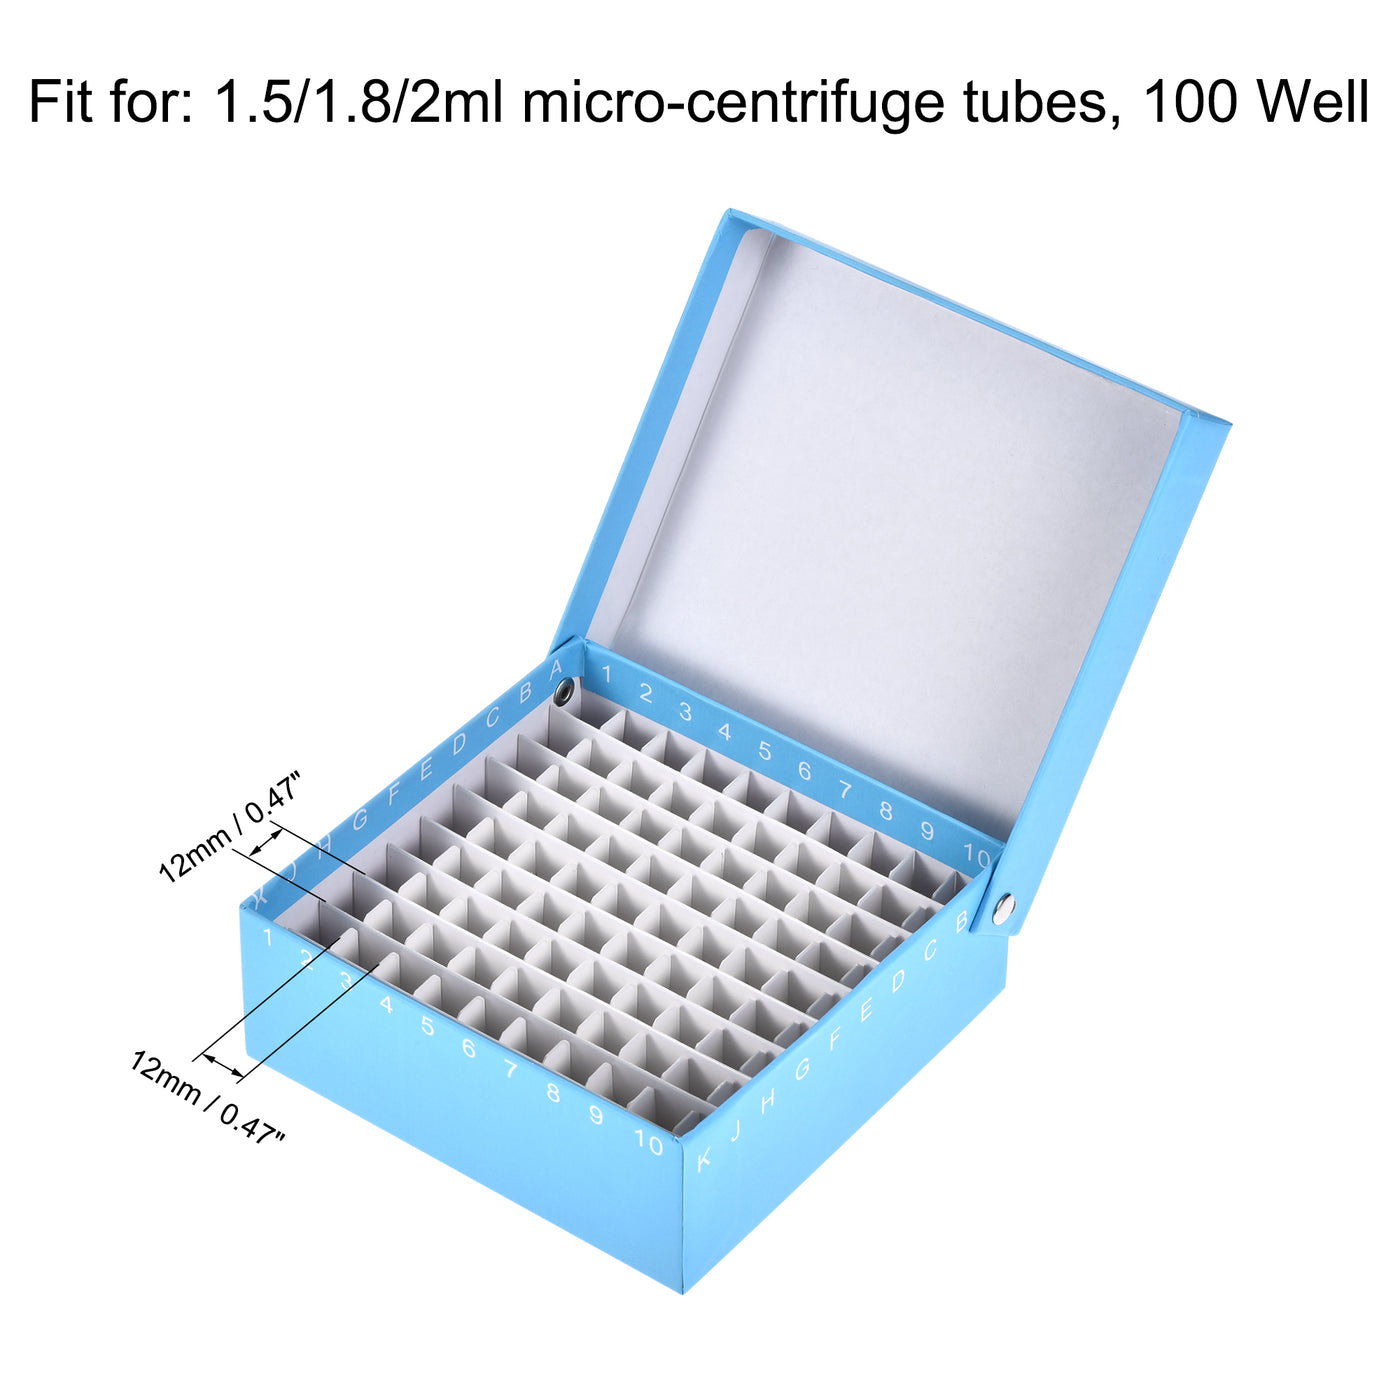 uxcell Uxcell Freezer Tube Box 100 Places Rack for 1.5/1.8/2ml Microcentrifuge Tubes 6in1 Set